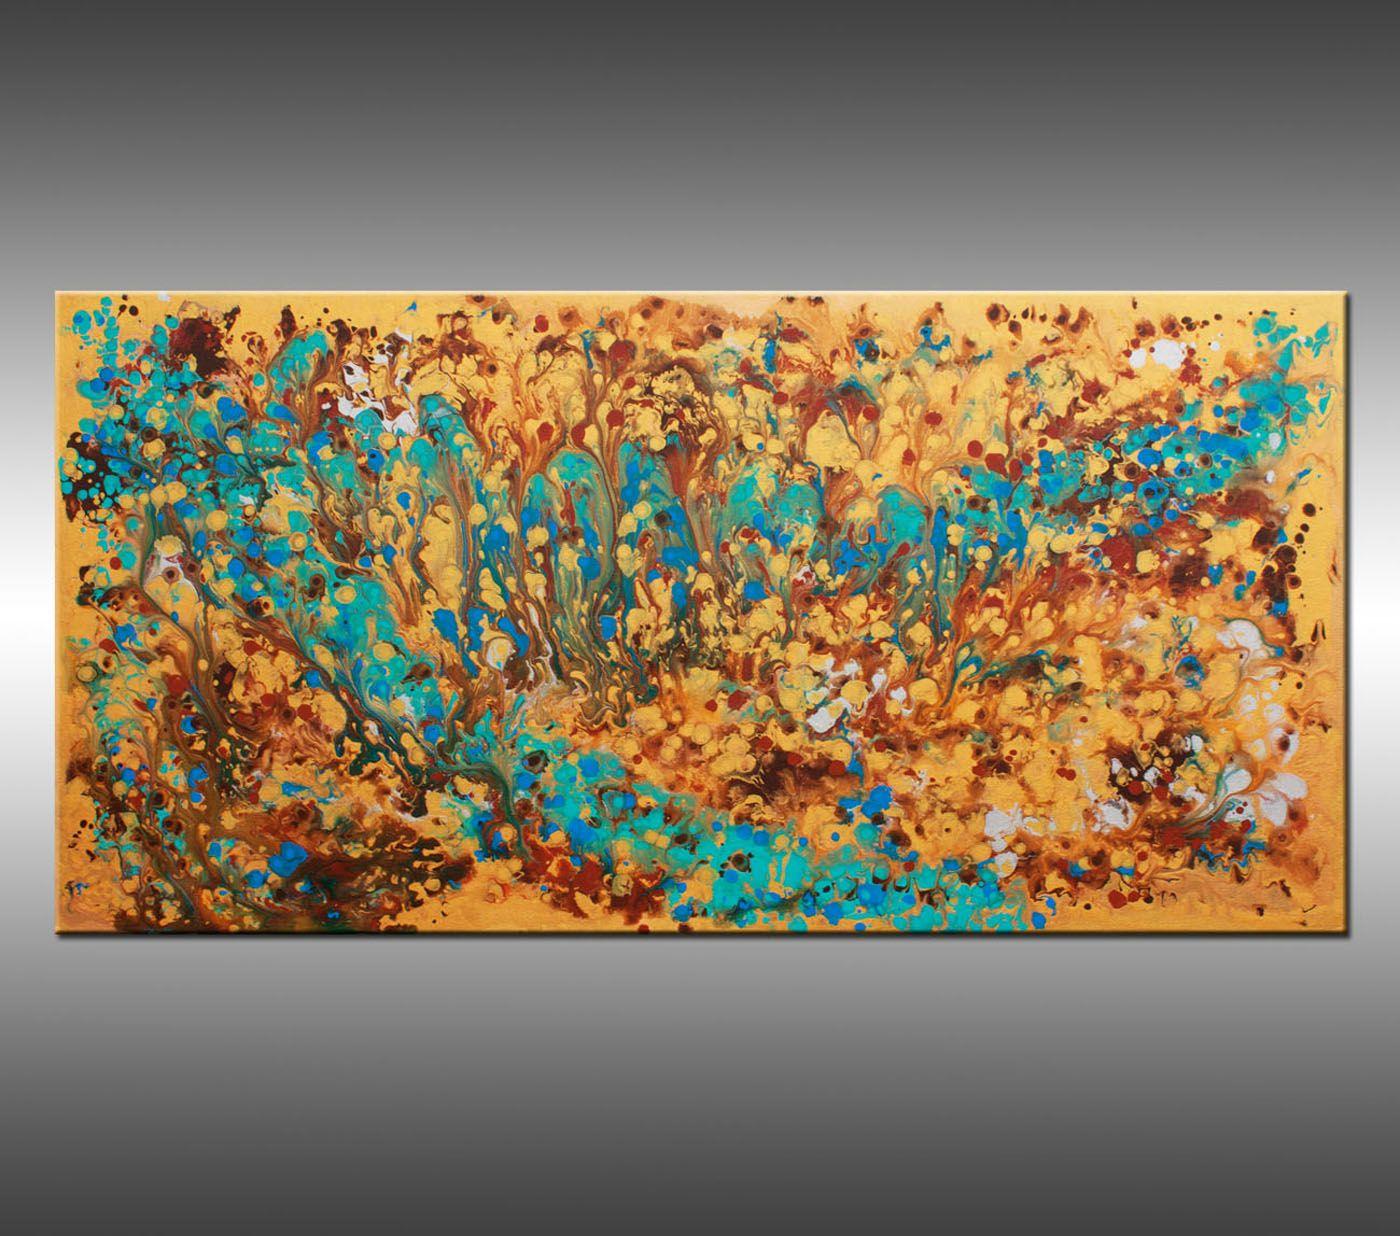 Liquid Energy 16 is an original, modern art painting from the Liquid Industrial series. This one-of-a-kind painting was created with acrylic paint on gallery-wrapped canvas. It has a width of 48 inches and a height of 24 inches with a depth of 1